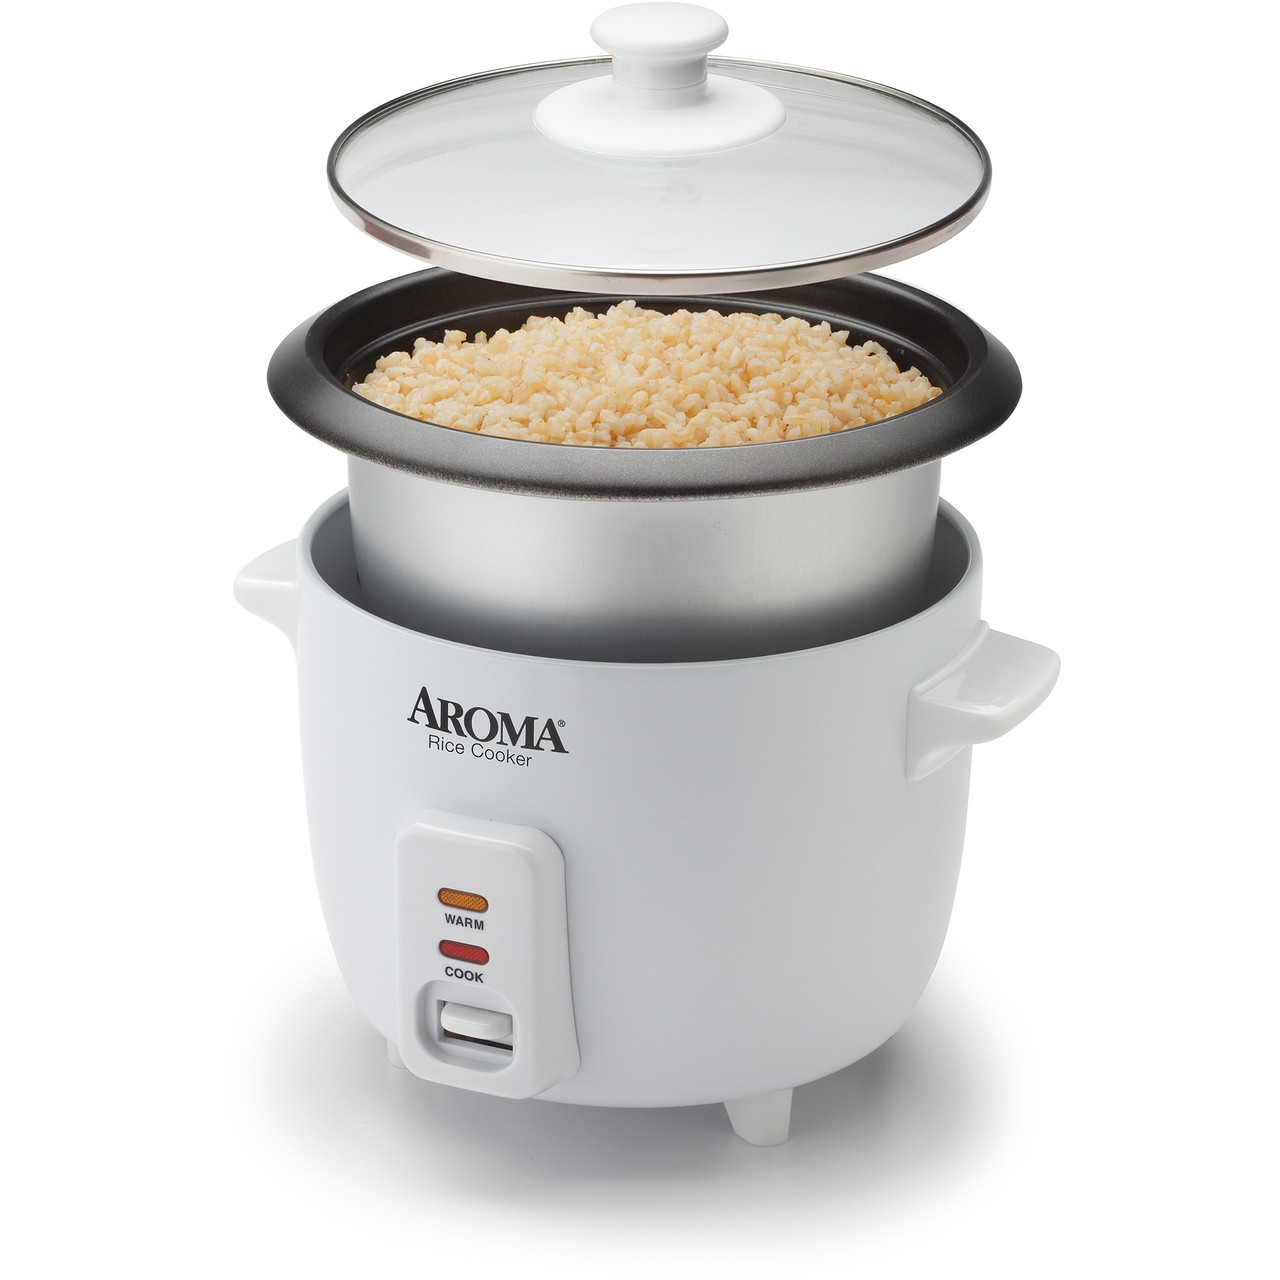 Aroma Housewares 6-Cup (Cooked) 1.5 qt. One Touch Rice Cooker, White